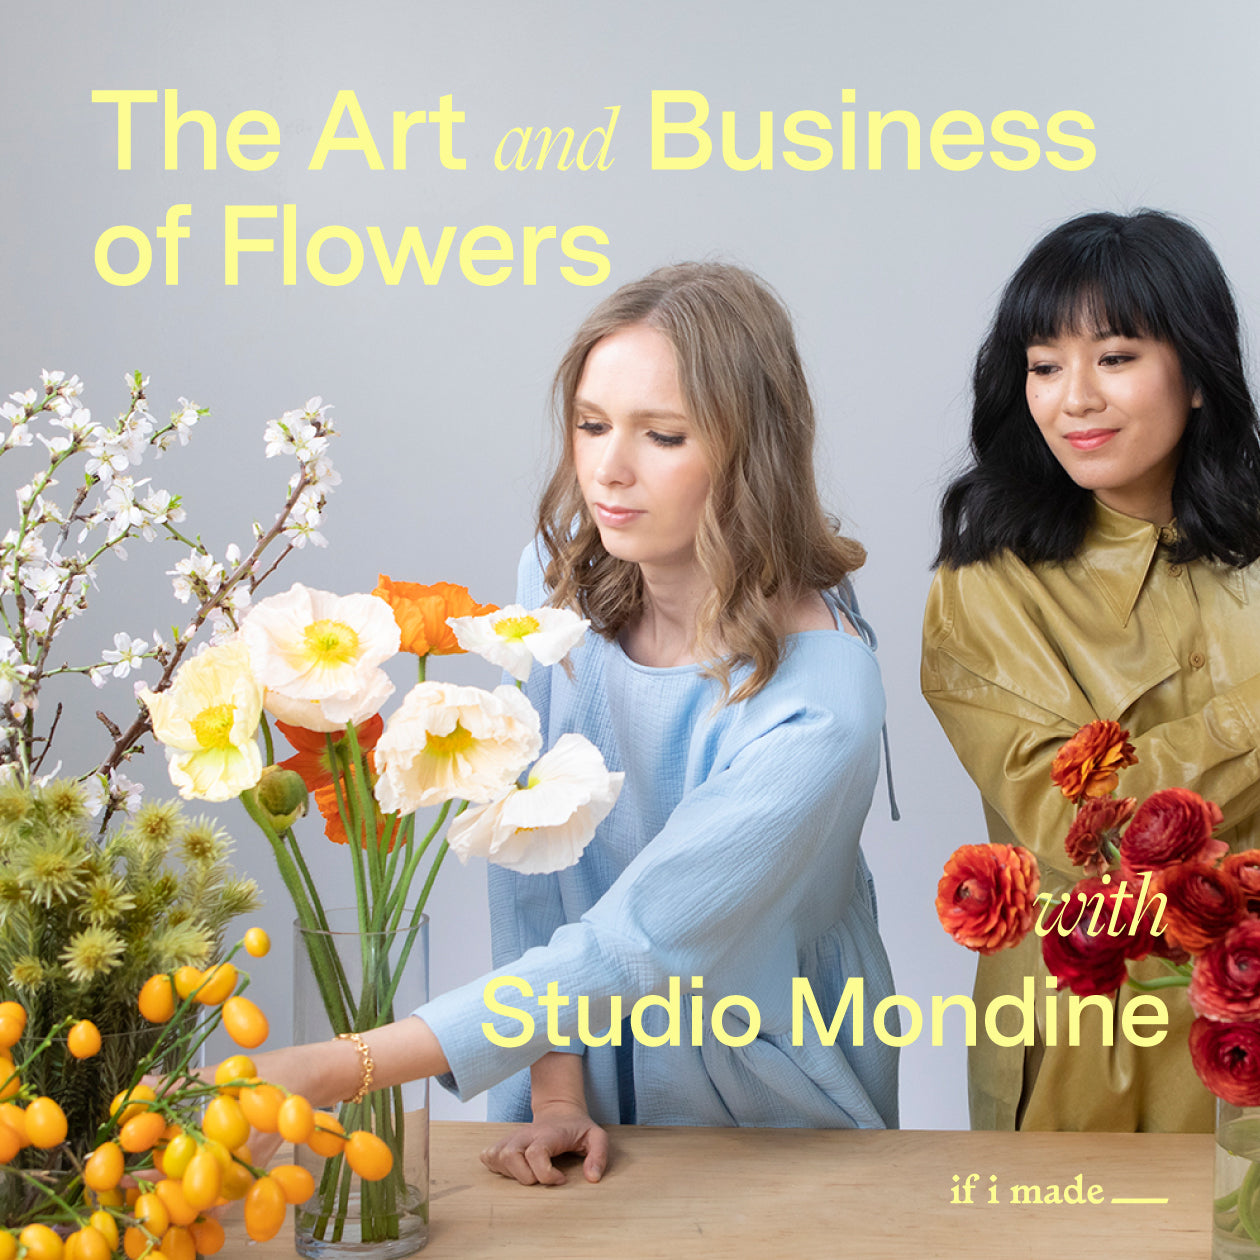 The Art and Business of Flowers with Studio Mondine (EGPP21)- 13 payments of $99